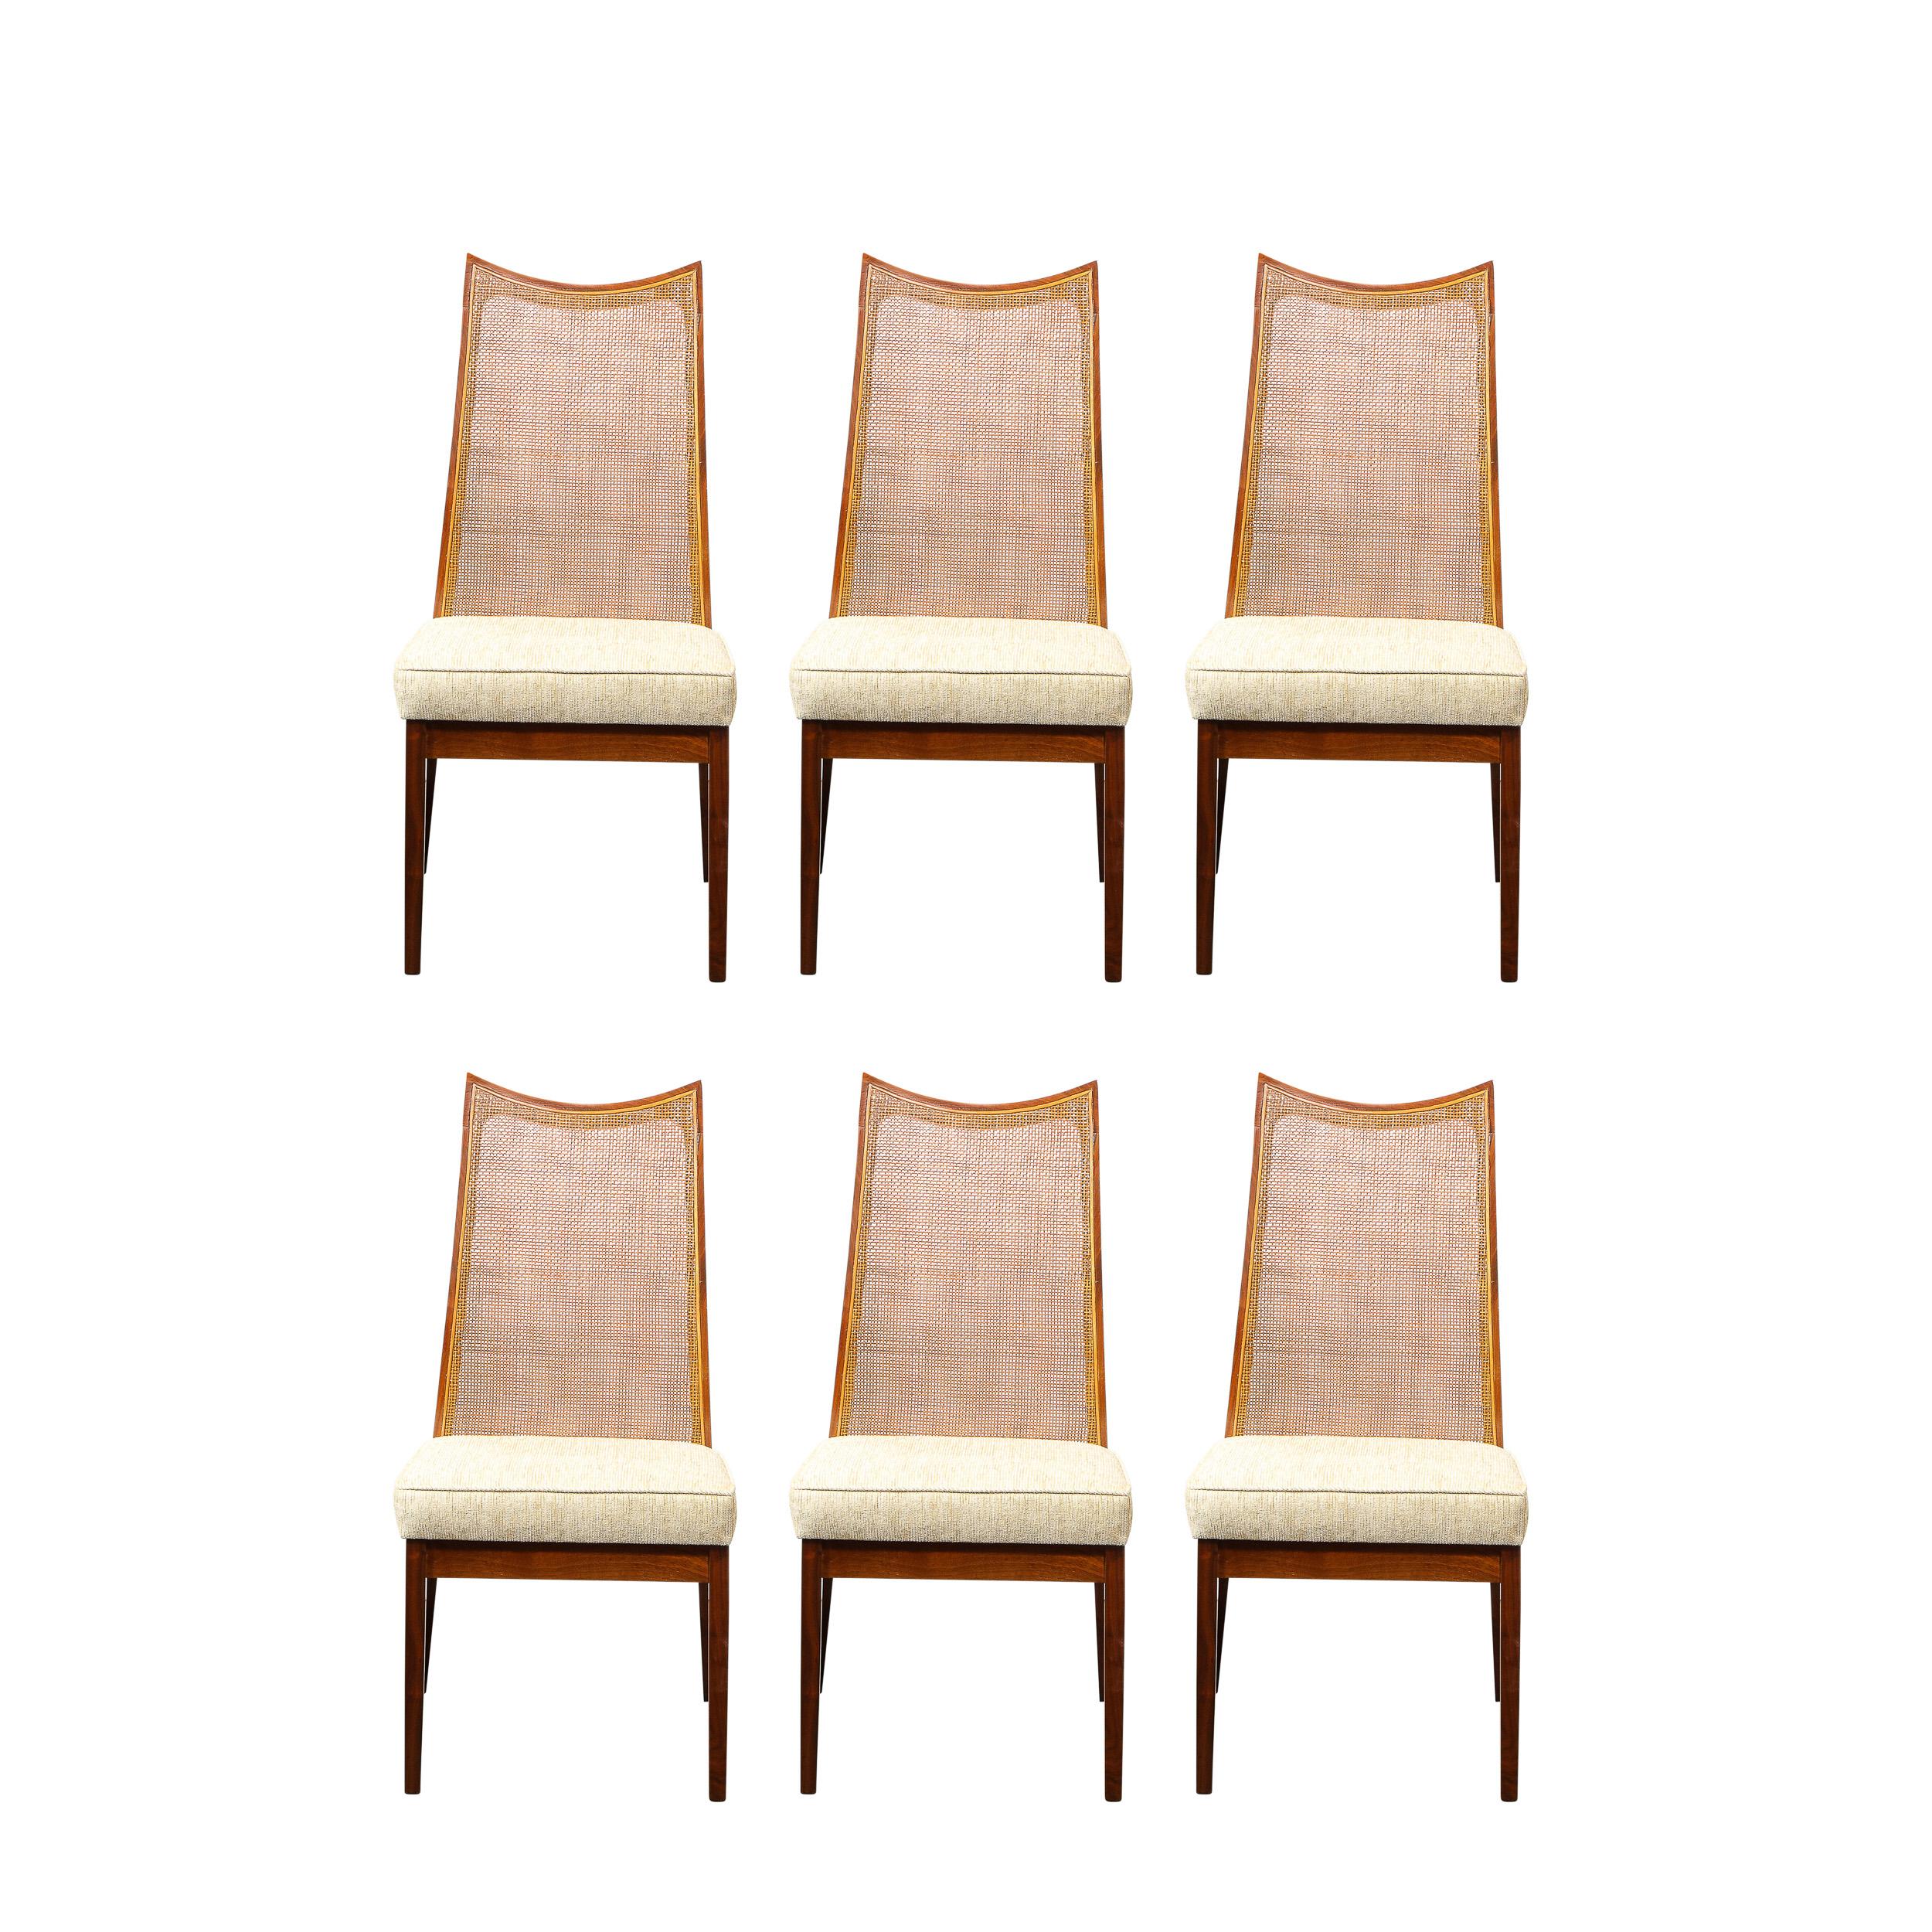 This stunning set of eight Mid Century Modern dining chairs were realized by the esteemed maker John Stuart Inc, in the United States circa 1960. The set features two arm chairs and six side chairs. The chairs offer hand rubbed bookmatched walnut